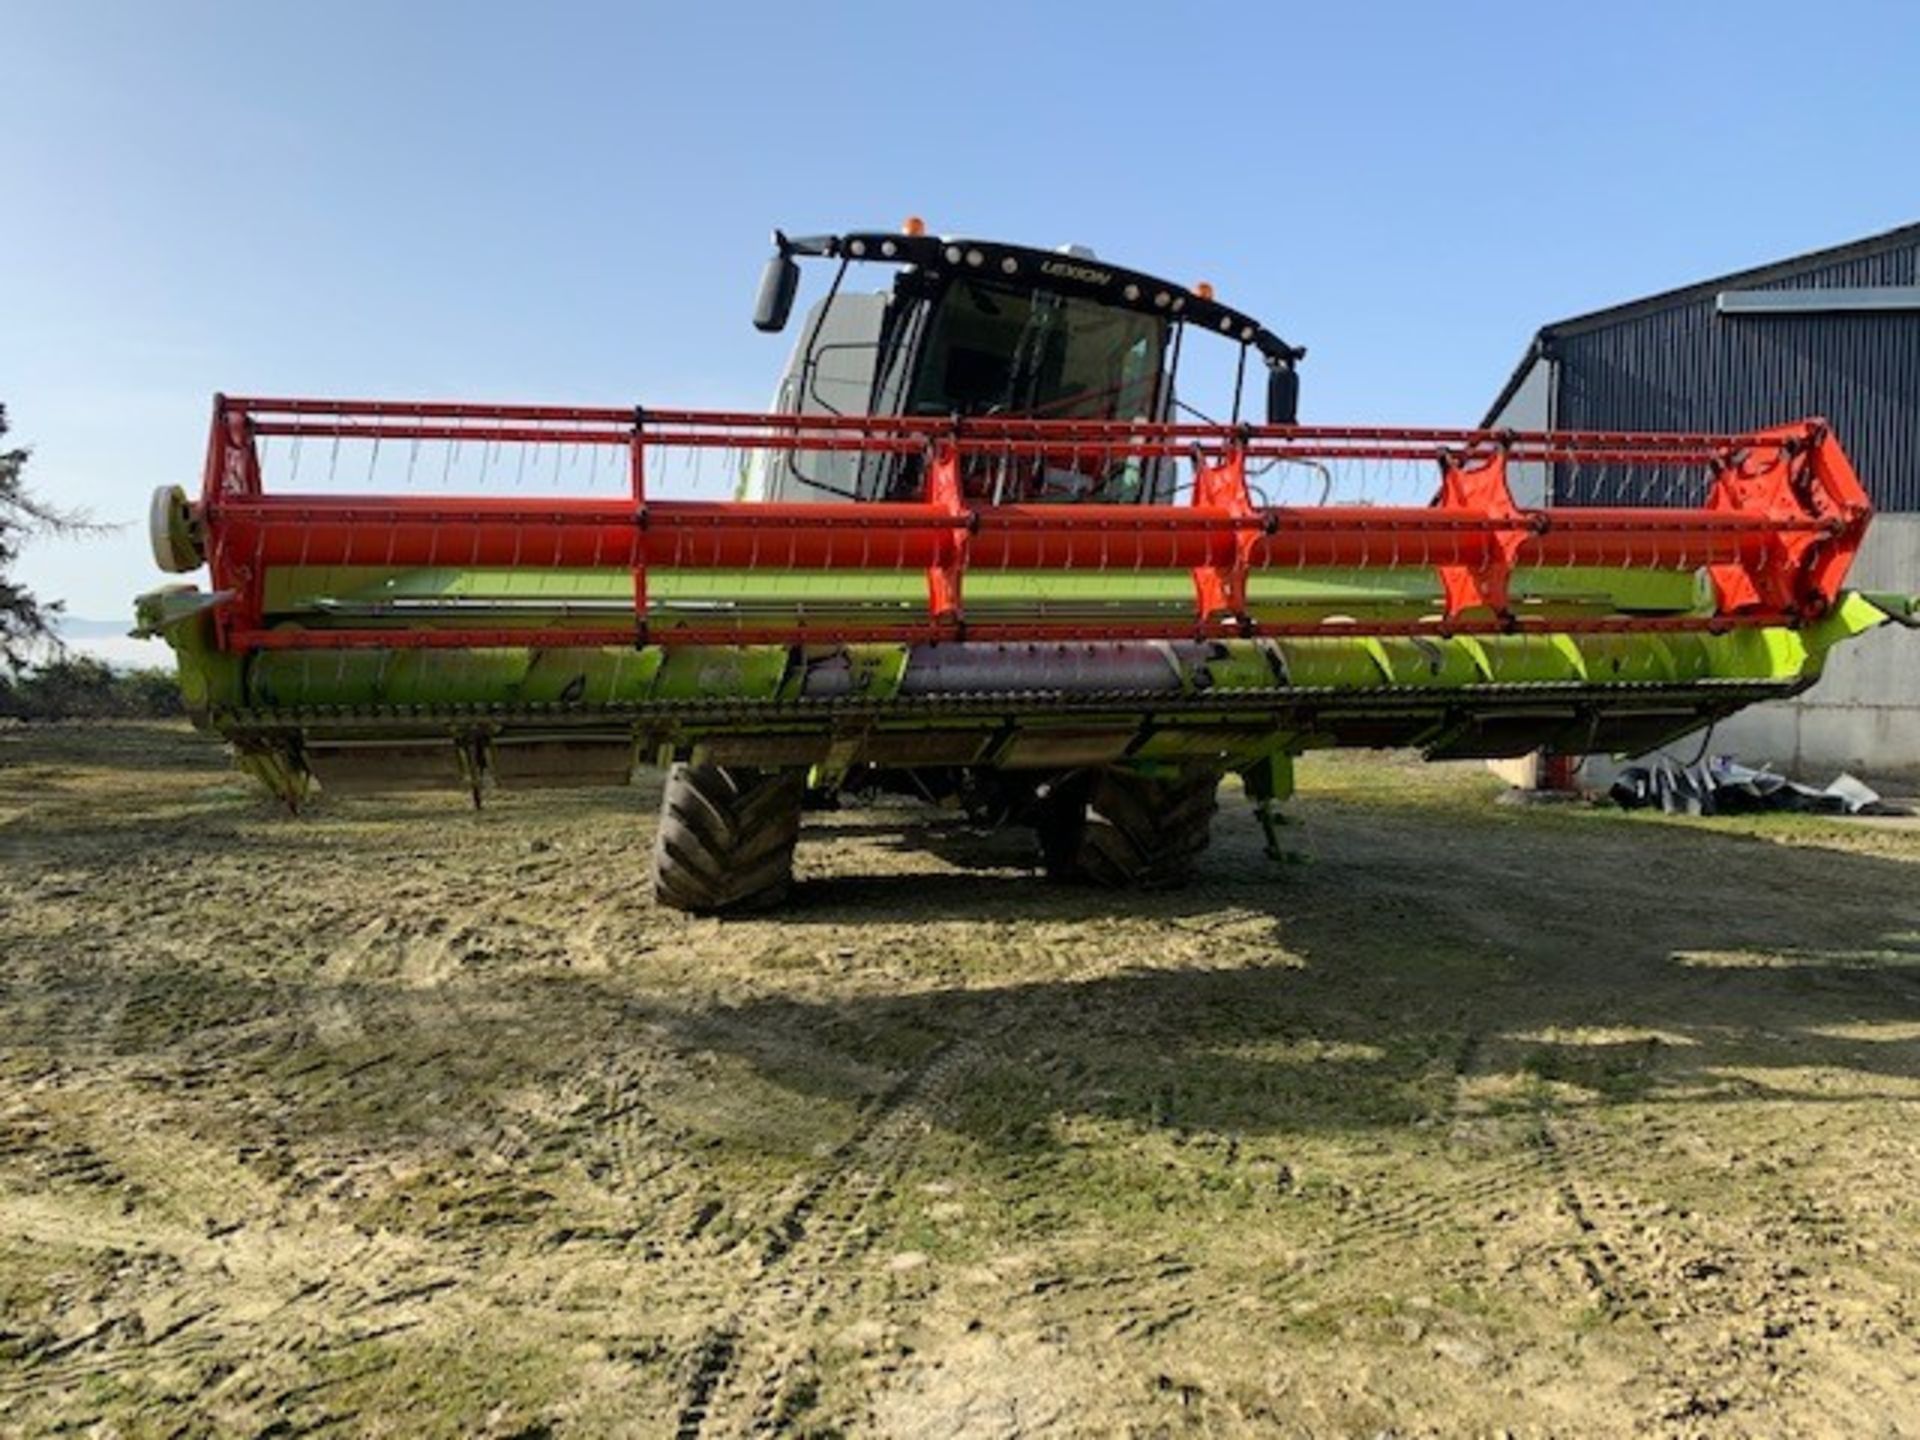 Claas Lexion 760 Montana Combine Harvester                 Reg  No.  DX14 ABO   First Reg.  05/08/ - Image 6 of 7